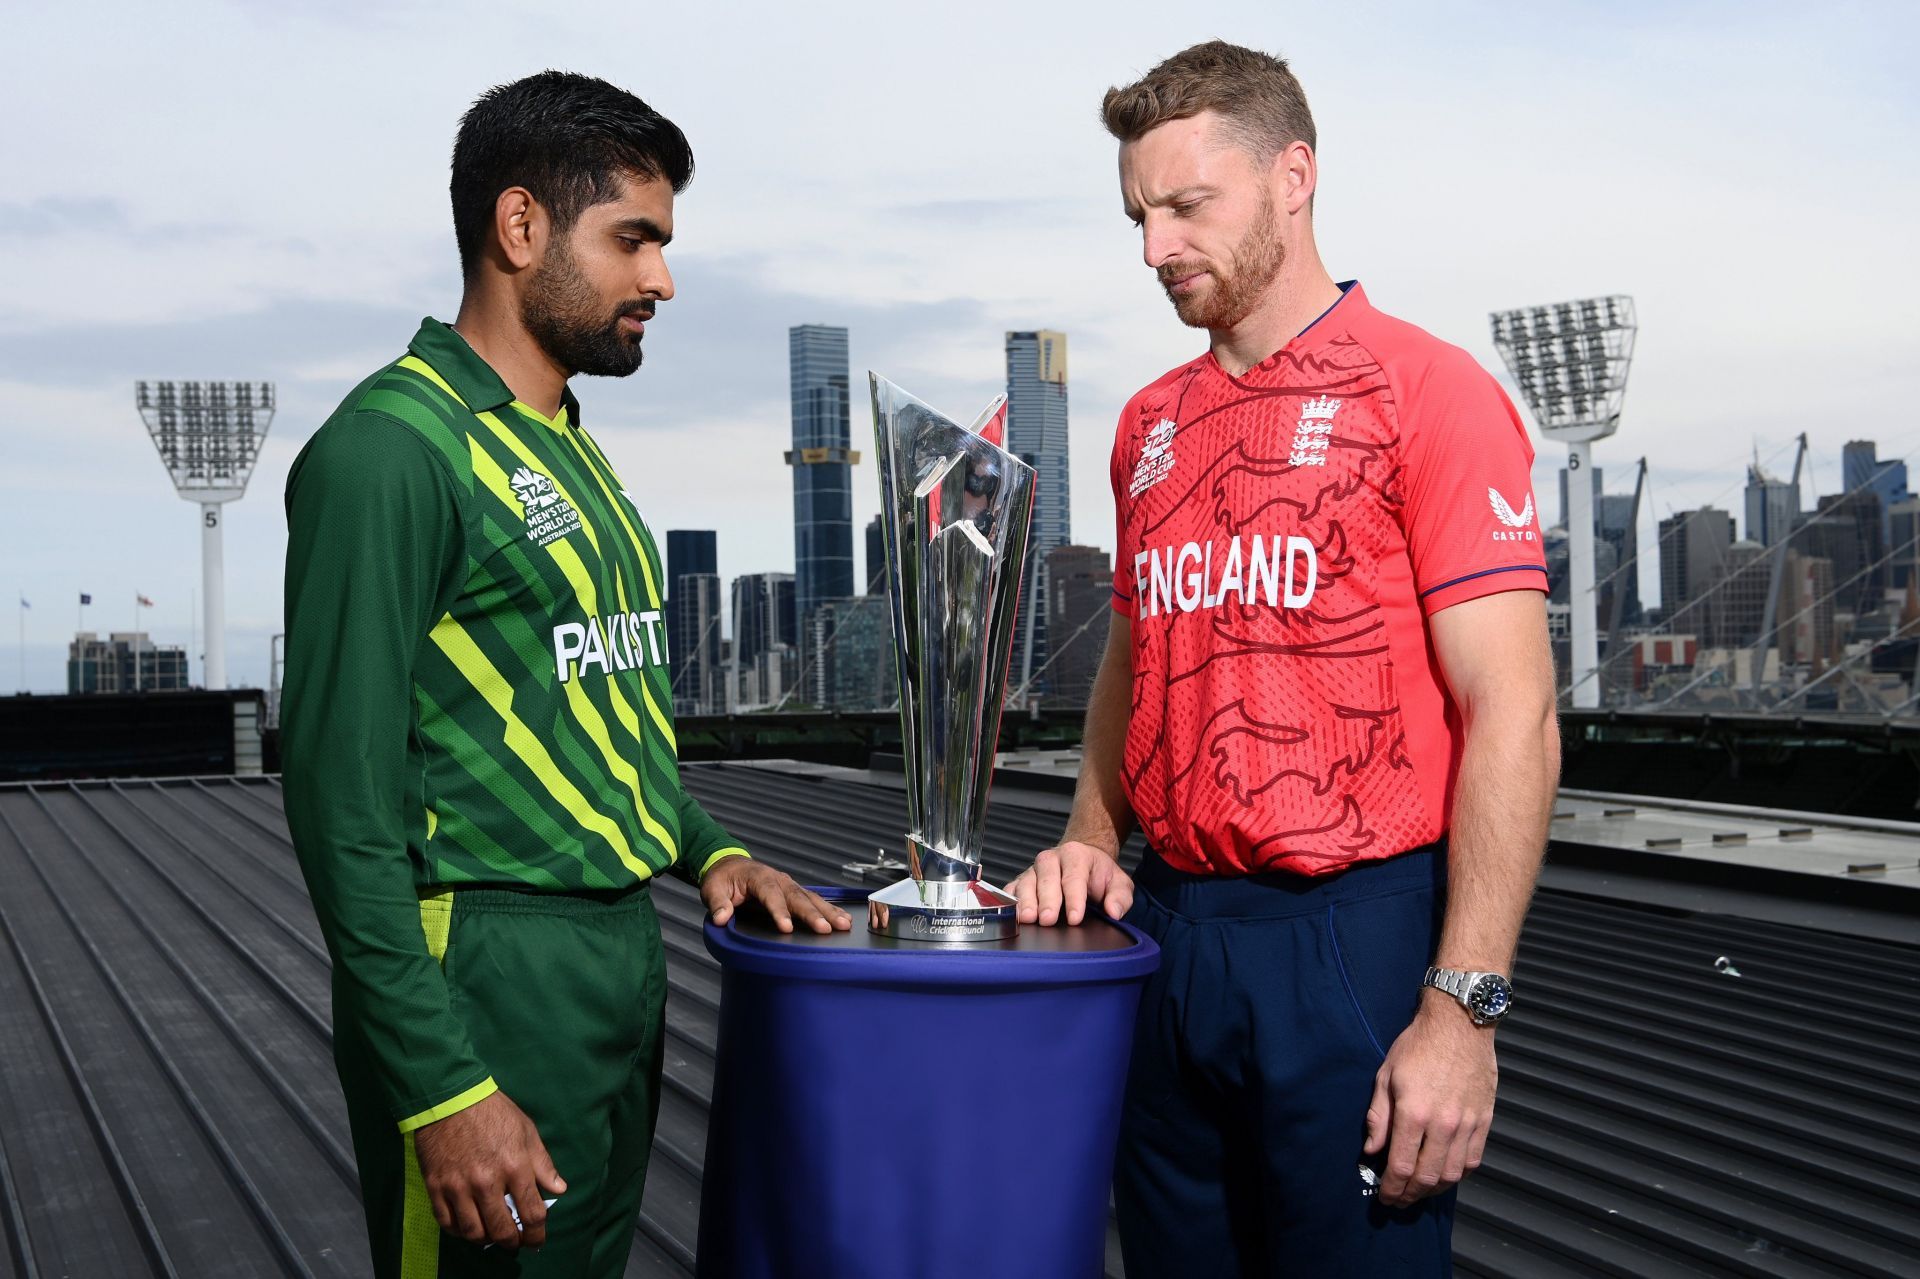 Babar Azam and Jos Buttler. (Image Credits: Getty)